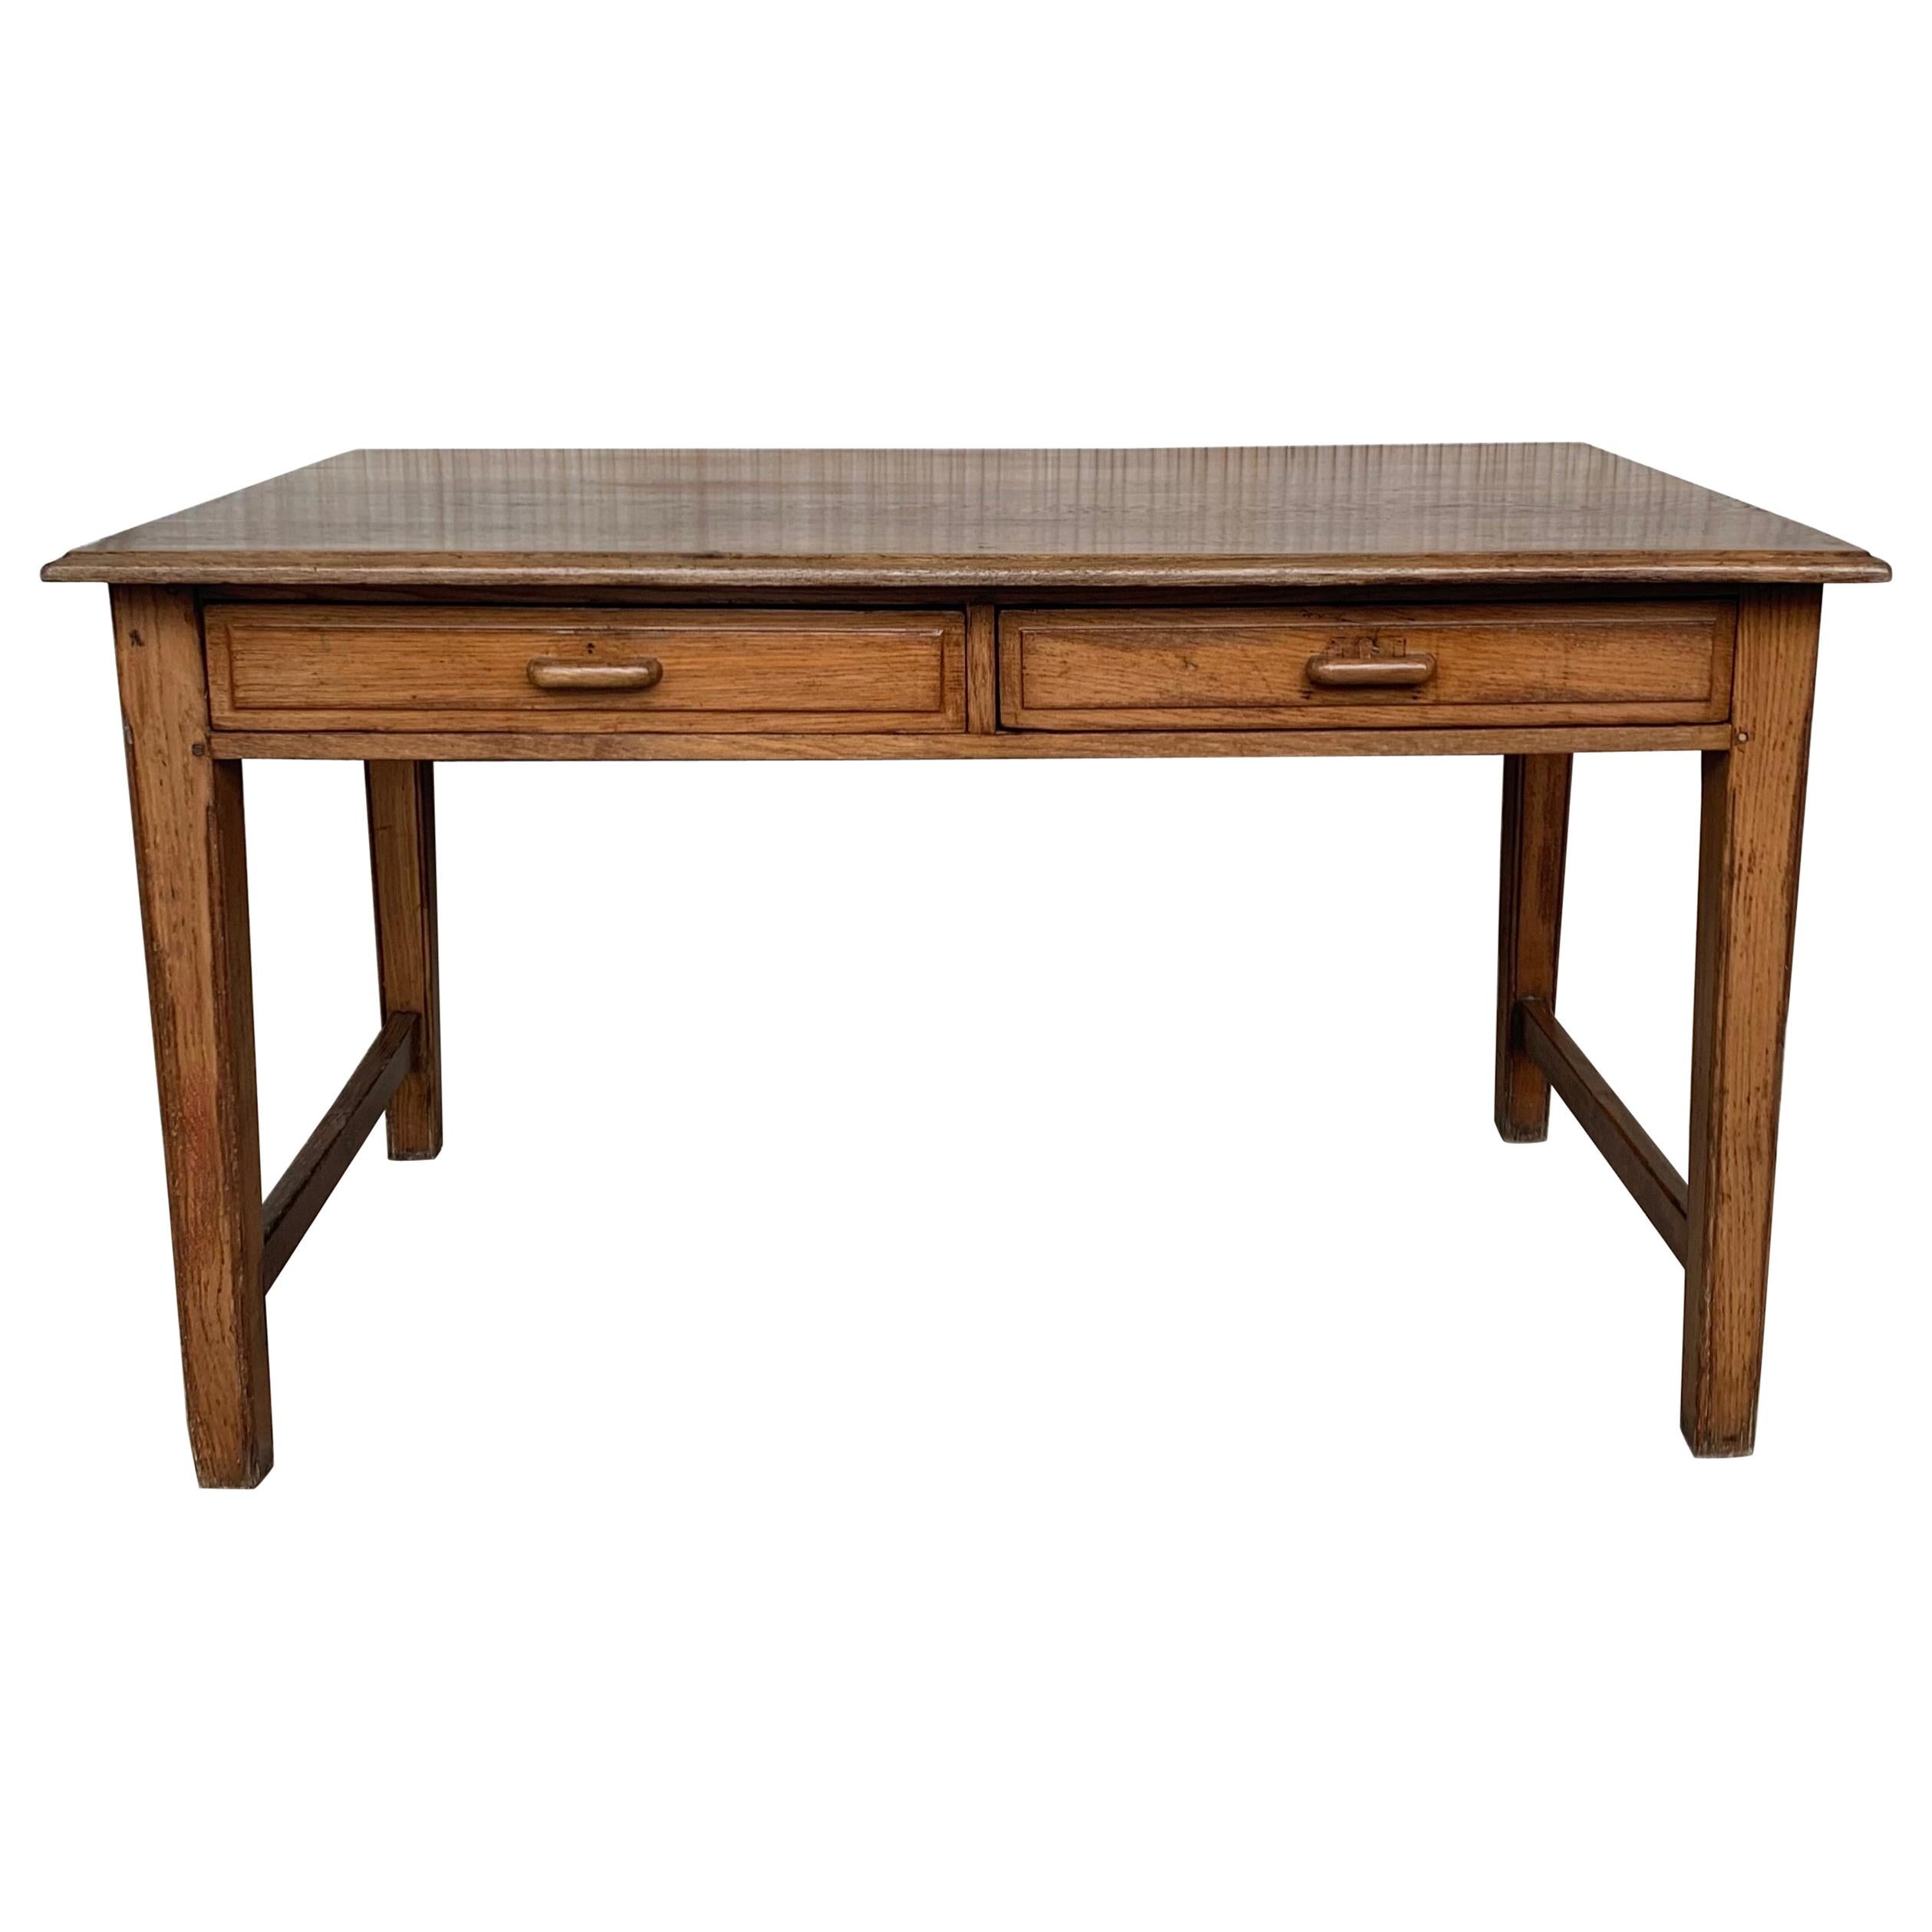 Early 20th Spanish Mobila Country Farm Desk with Two Drawers or Butcher Block